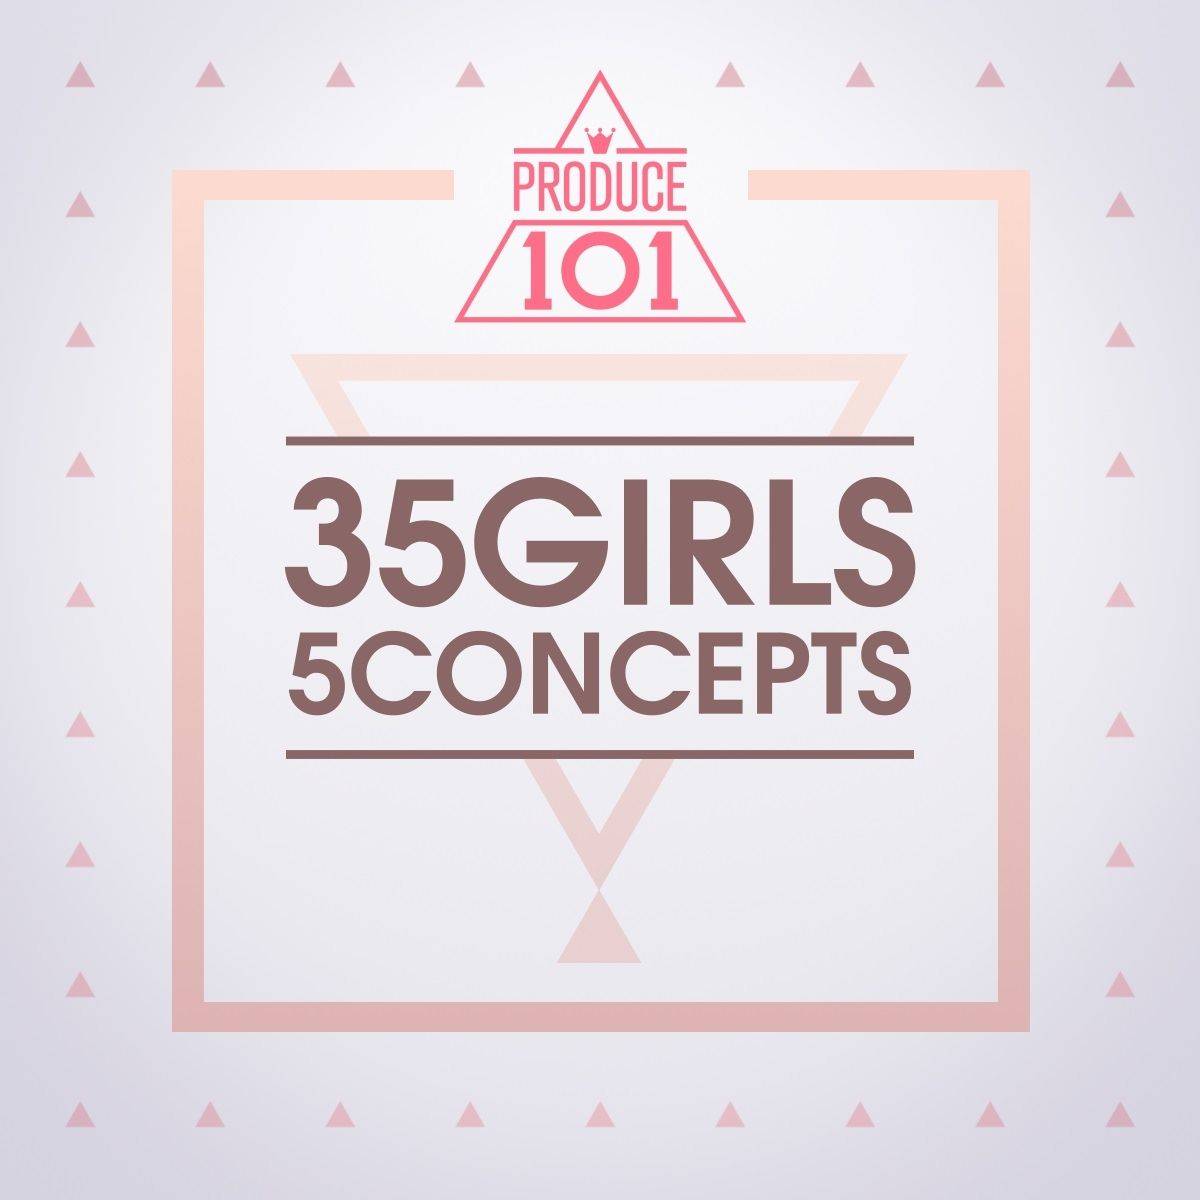 35 Girls 5 Concepts